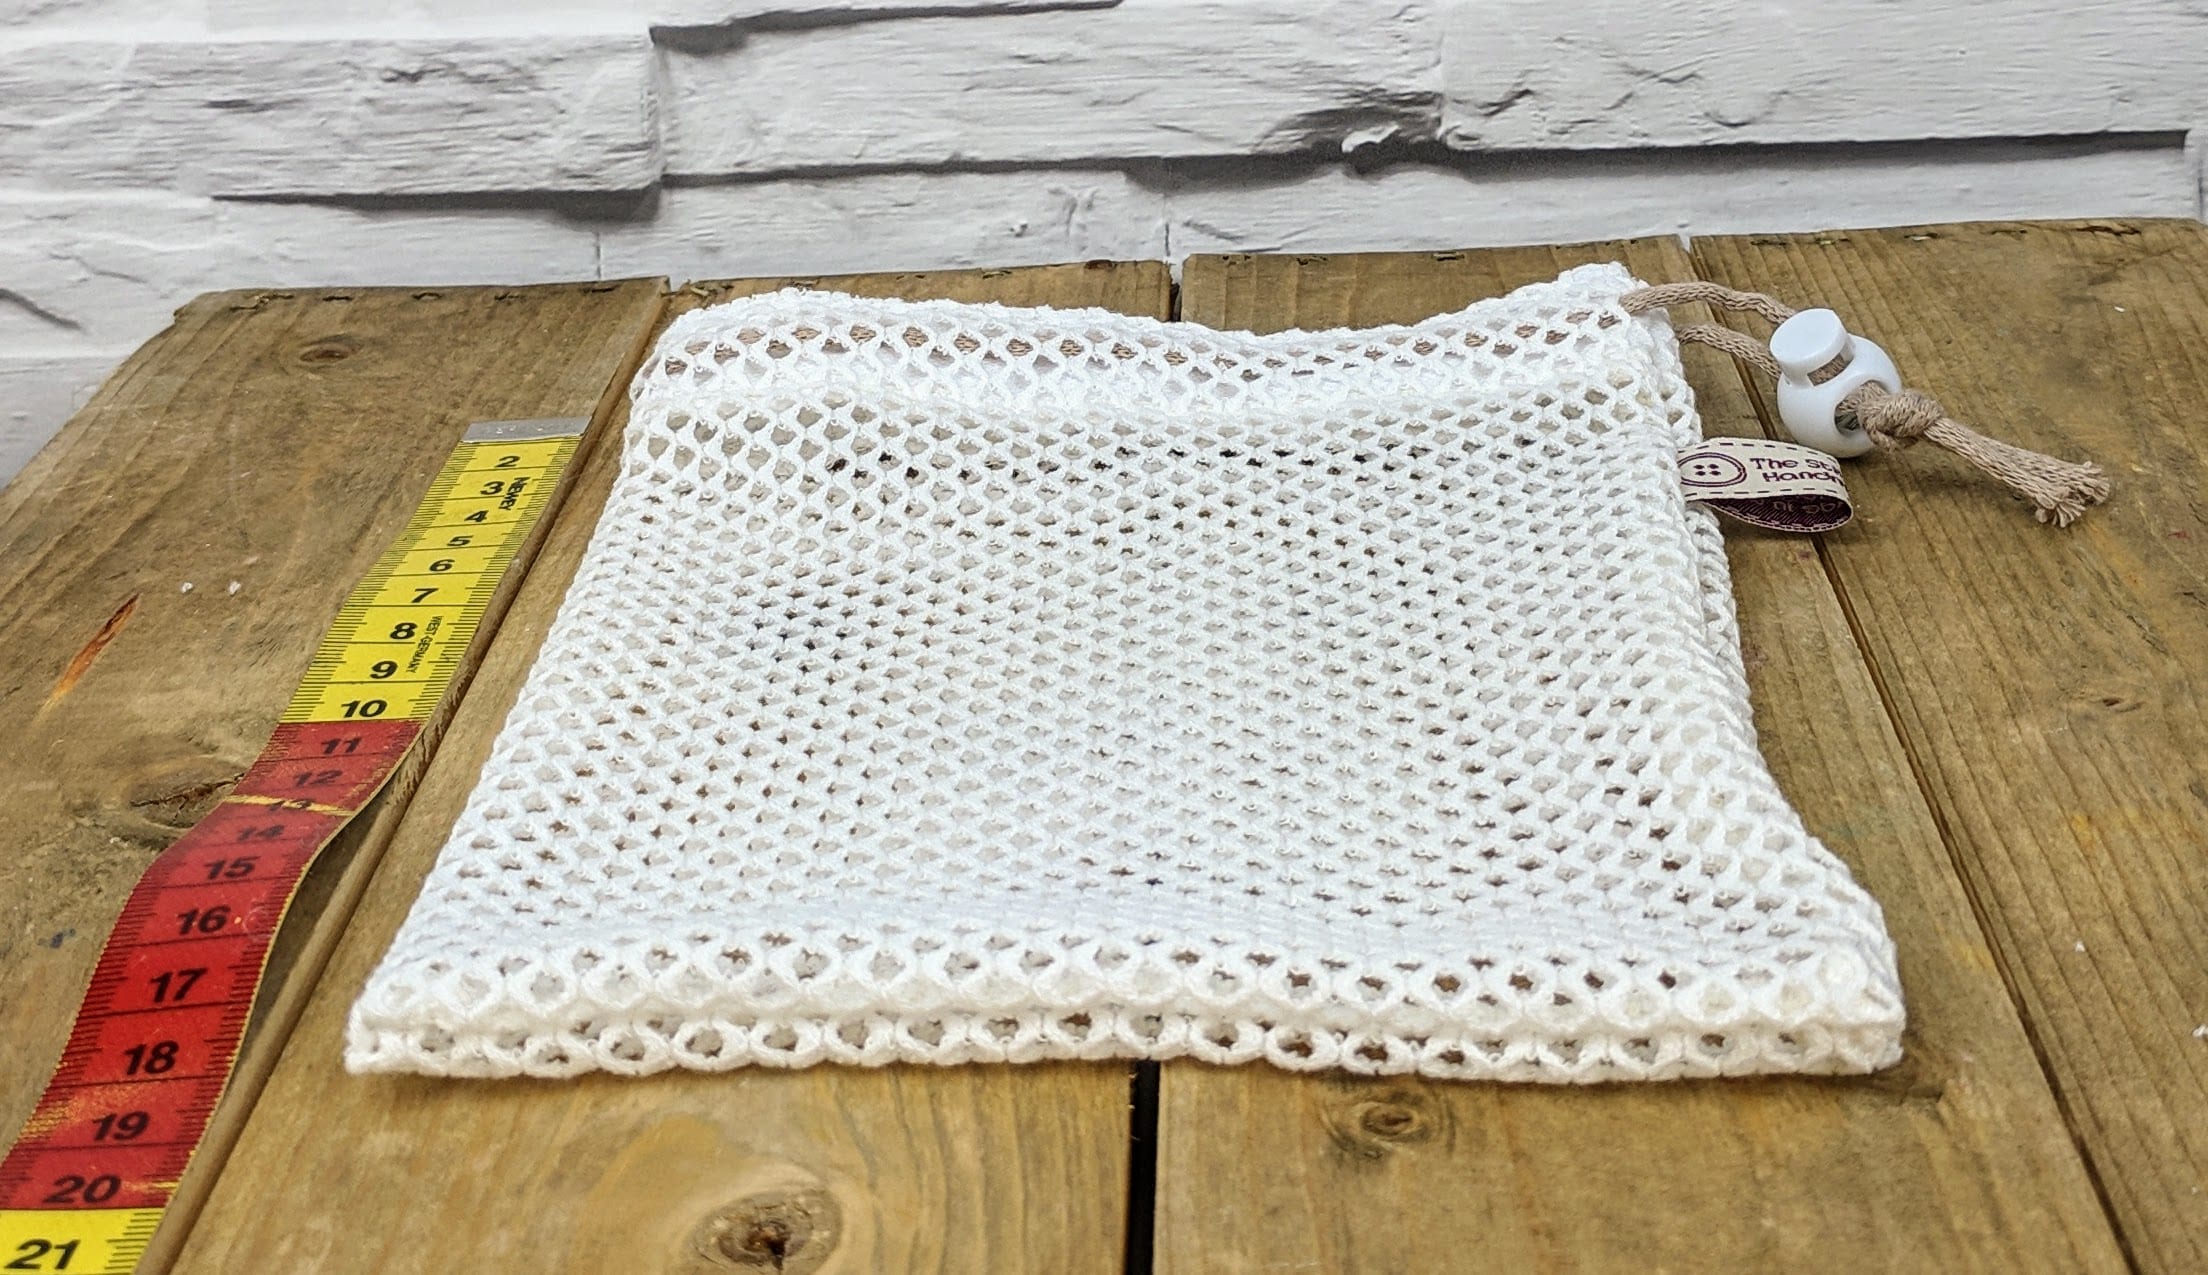 Reusable Small Mesh Wash /Laundry Bag in White. Great for washing reusable  make up pads and other small delicates.